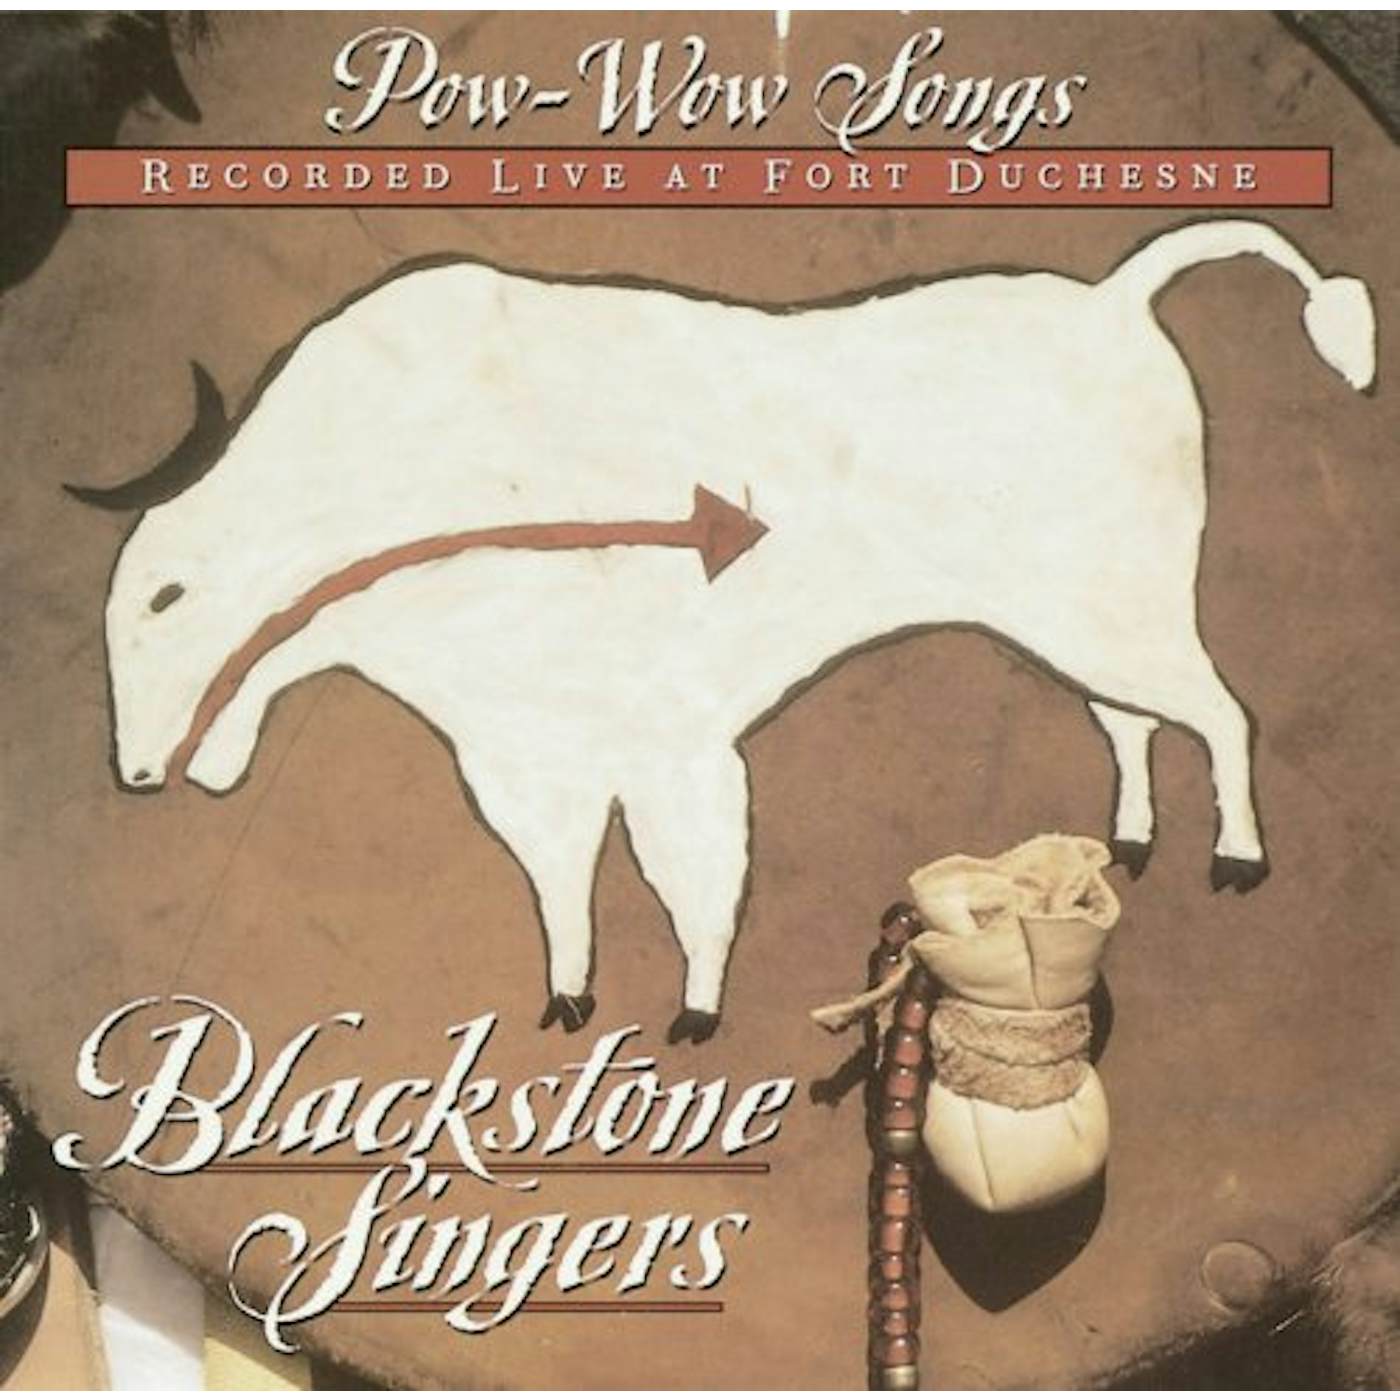 Blackstone POW-WOW SONGS RECORDED LIVE AT FORT DUCHESNE CD